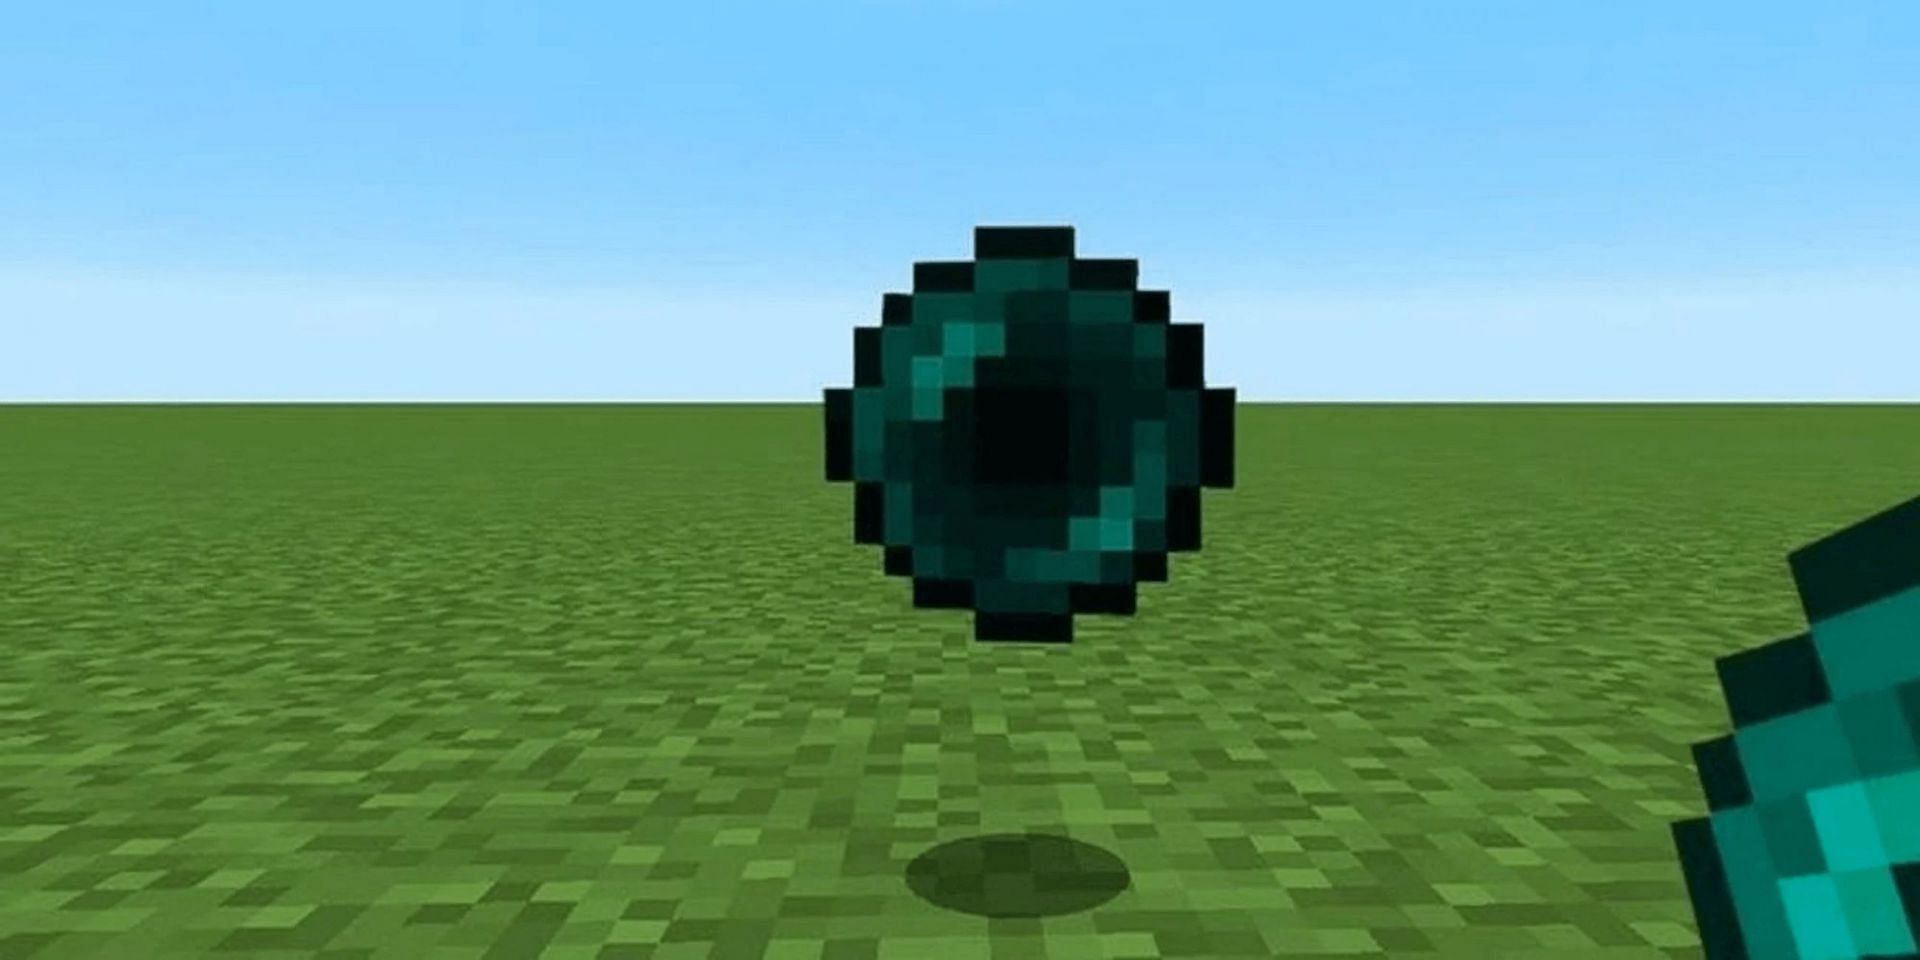 Ender pearls can allow players to teleport short distances (Image via Mojang)